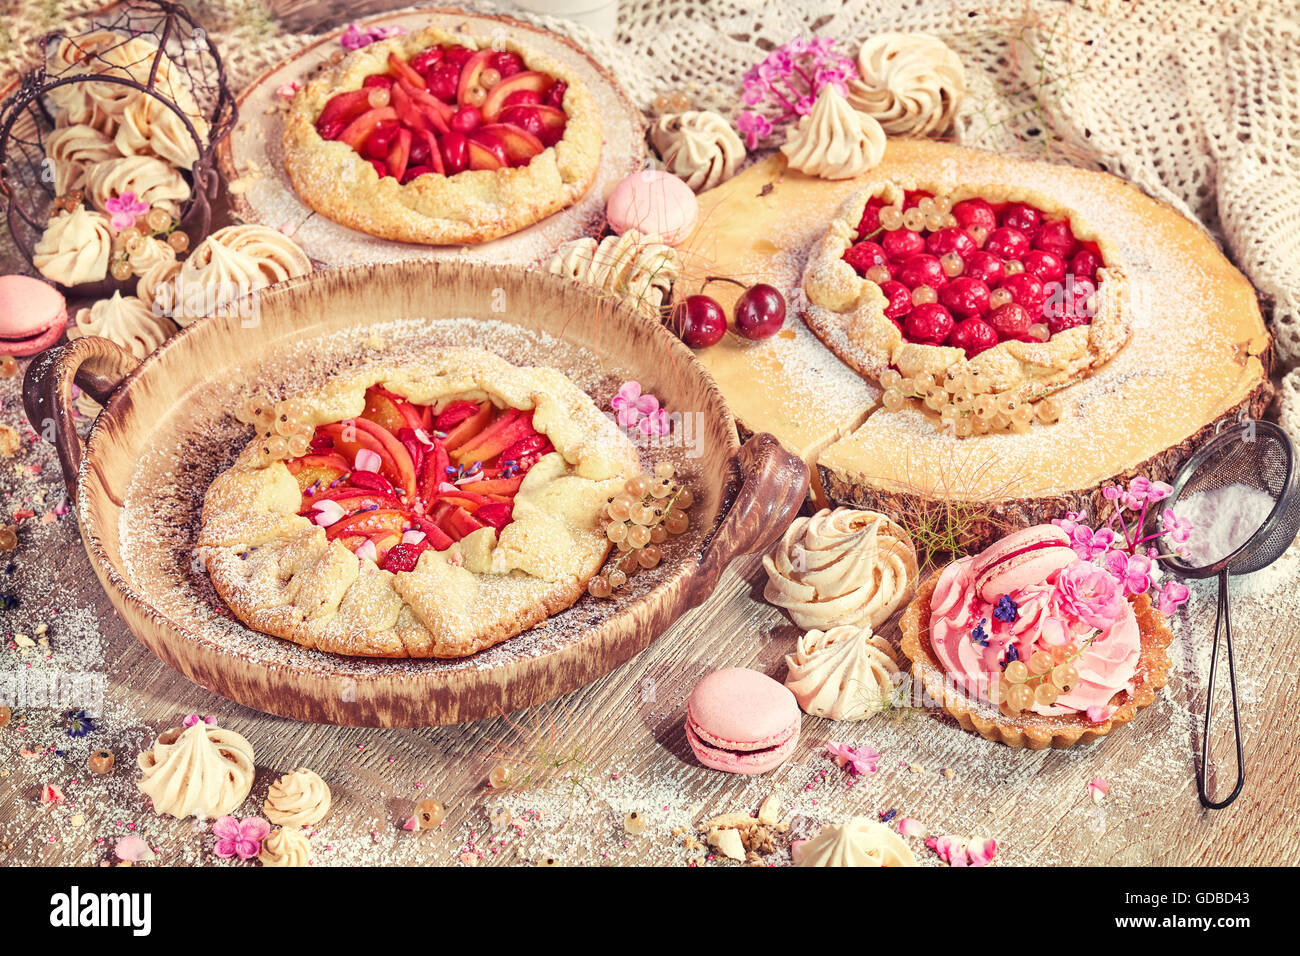 Rustic set of fruit tarts and meringues, homemade pastry, pastel colors. Stock Photo